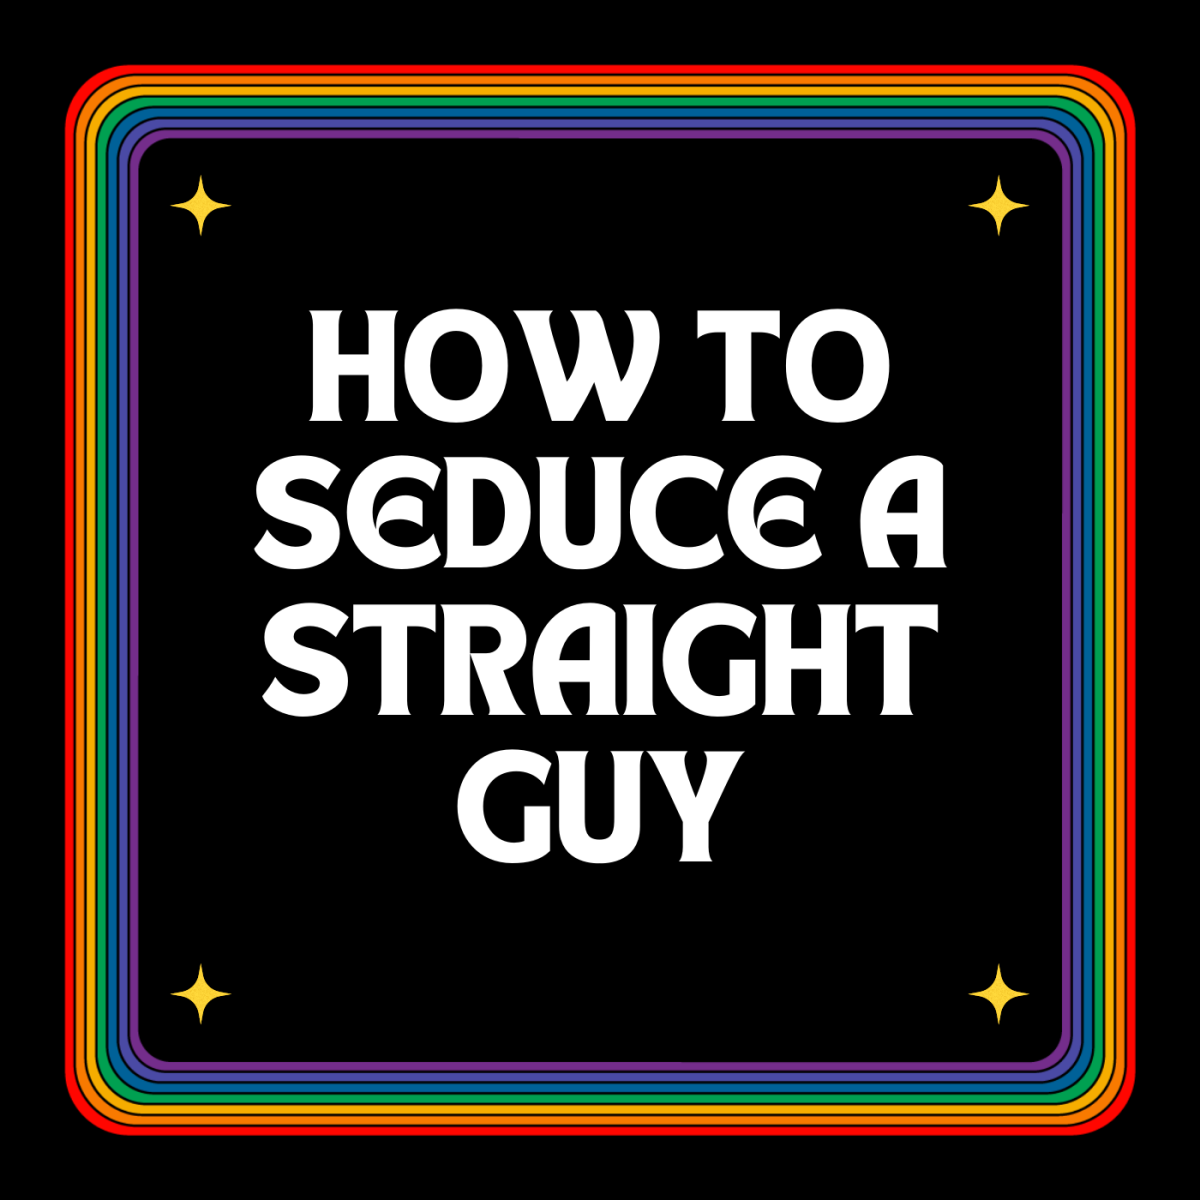 7 Steps On How To Seduce A Straight Guy